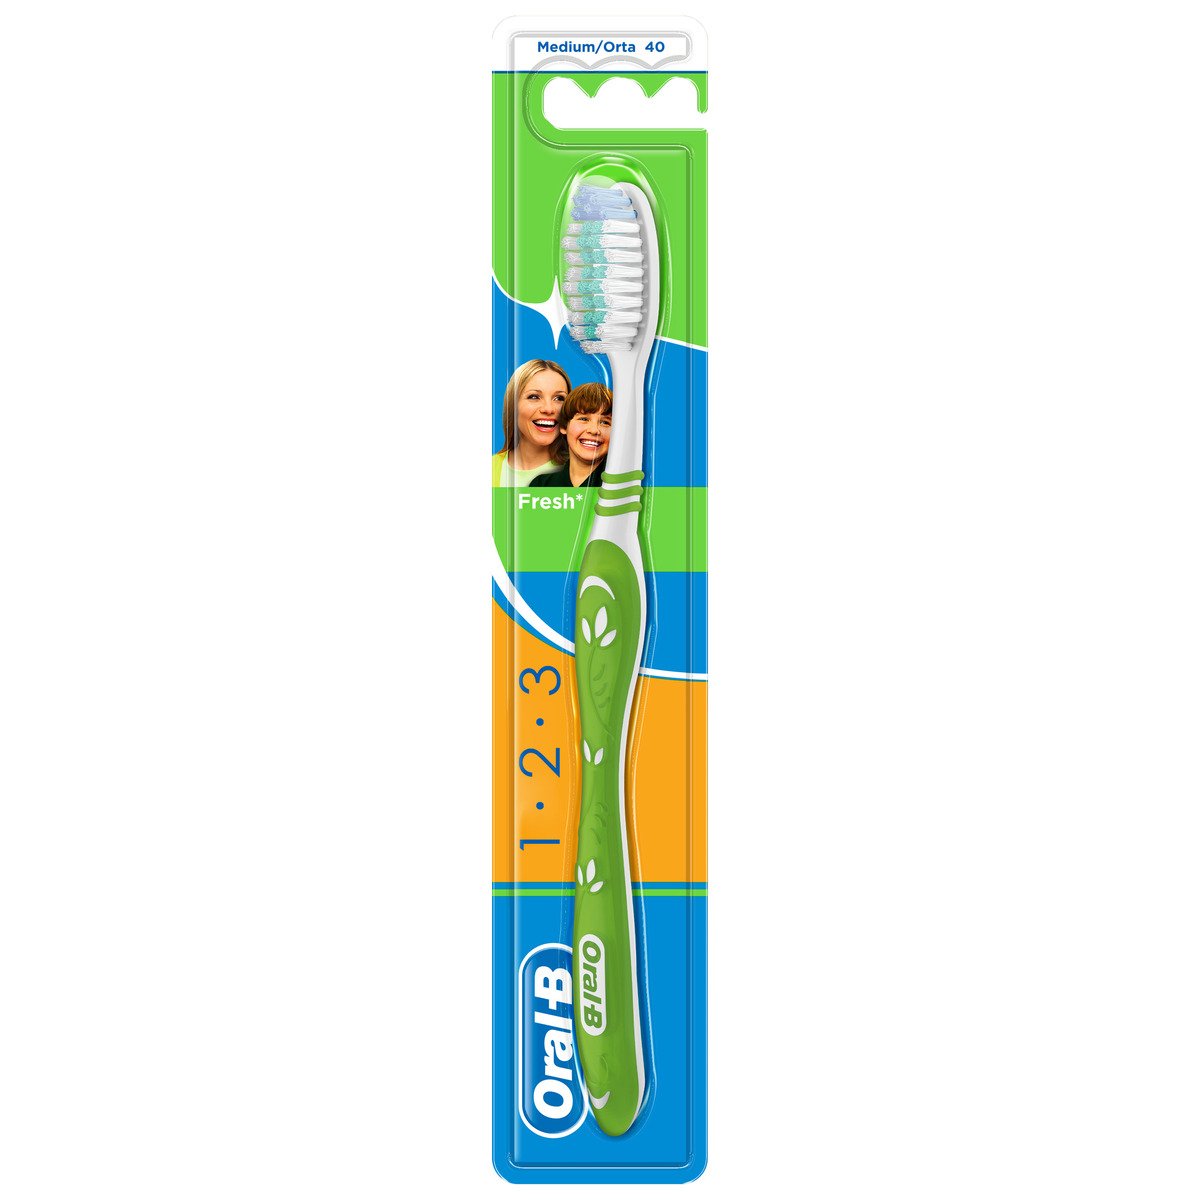 Oral-B 123 Fresh Toothbrush - 40 Medium Assorted Color 1 pc